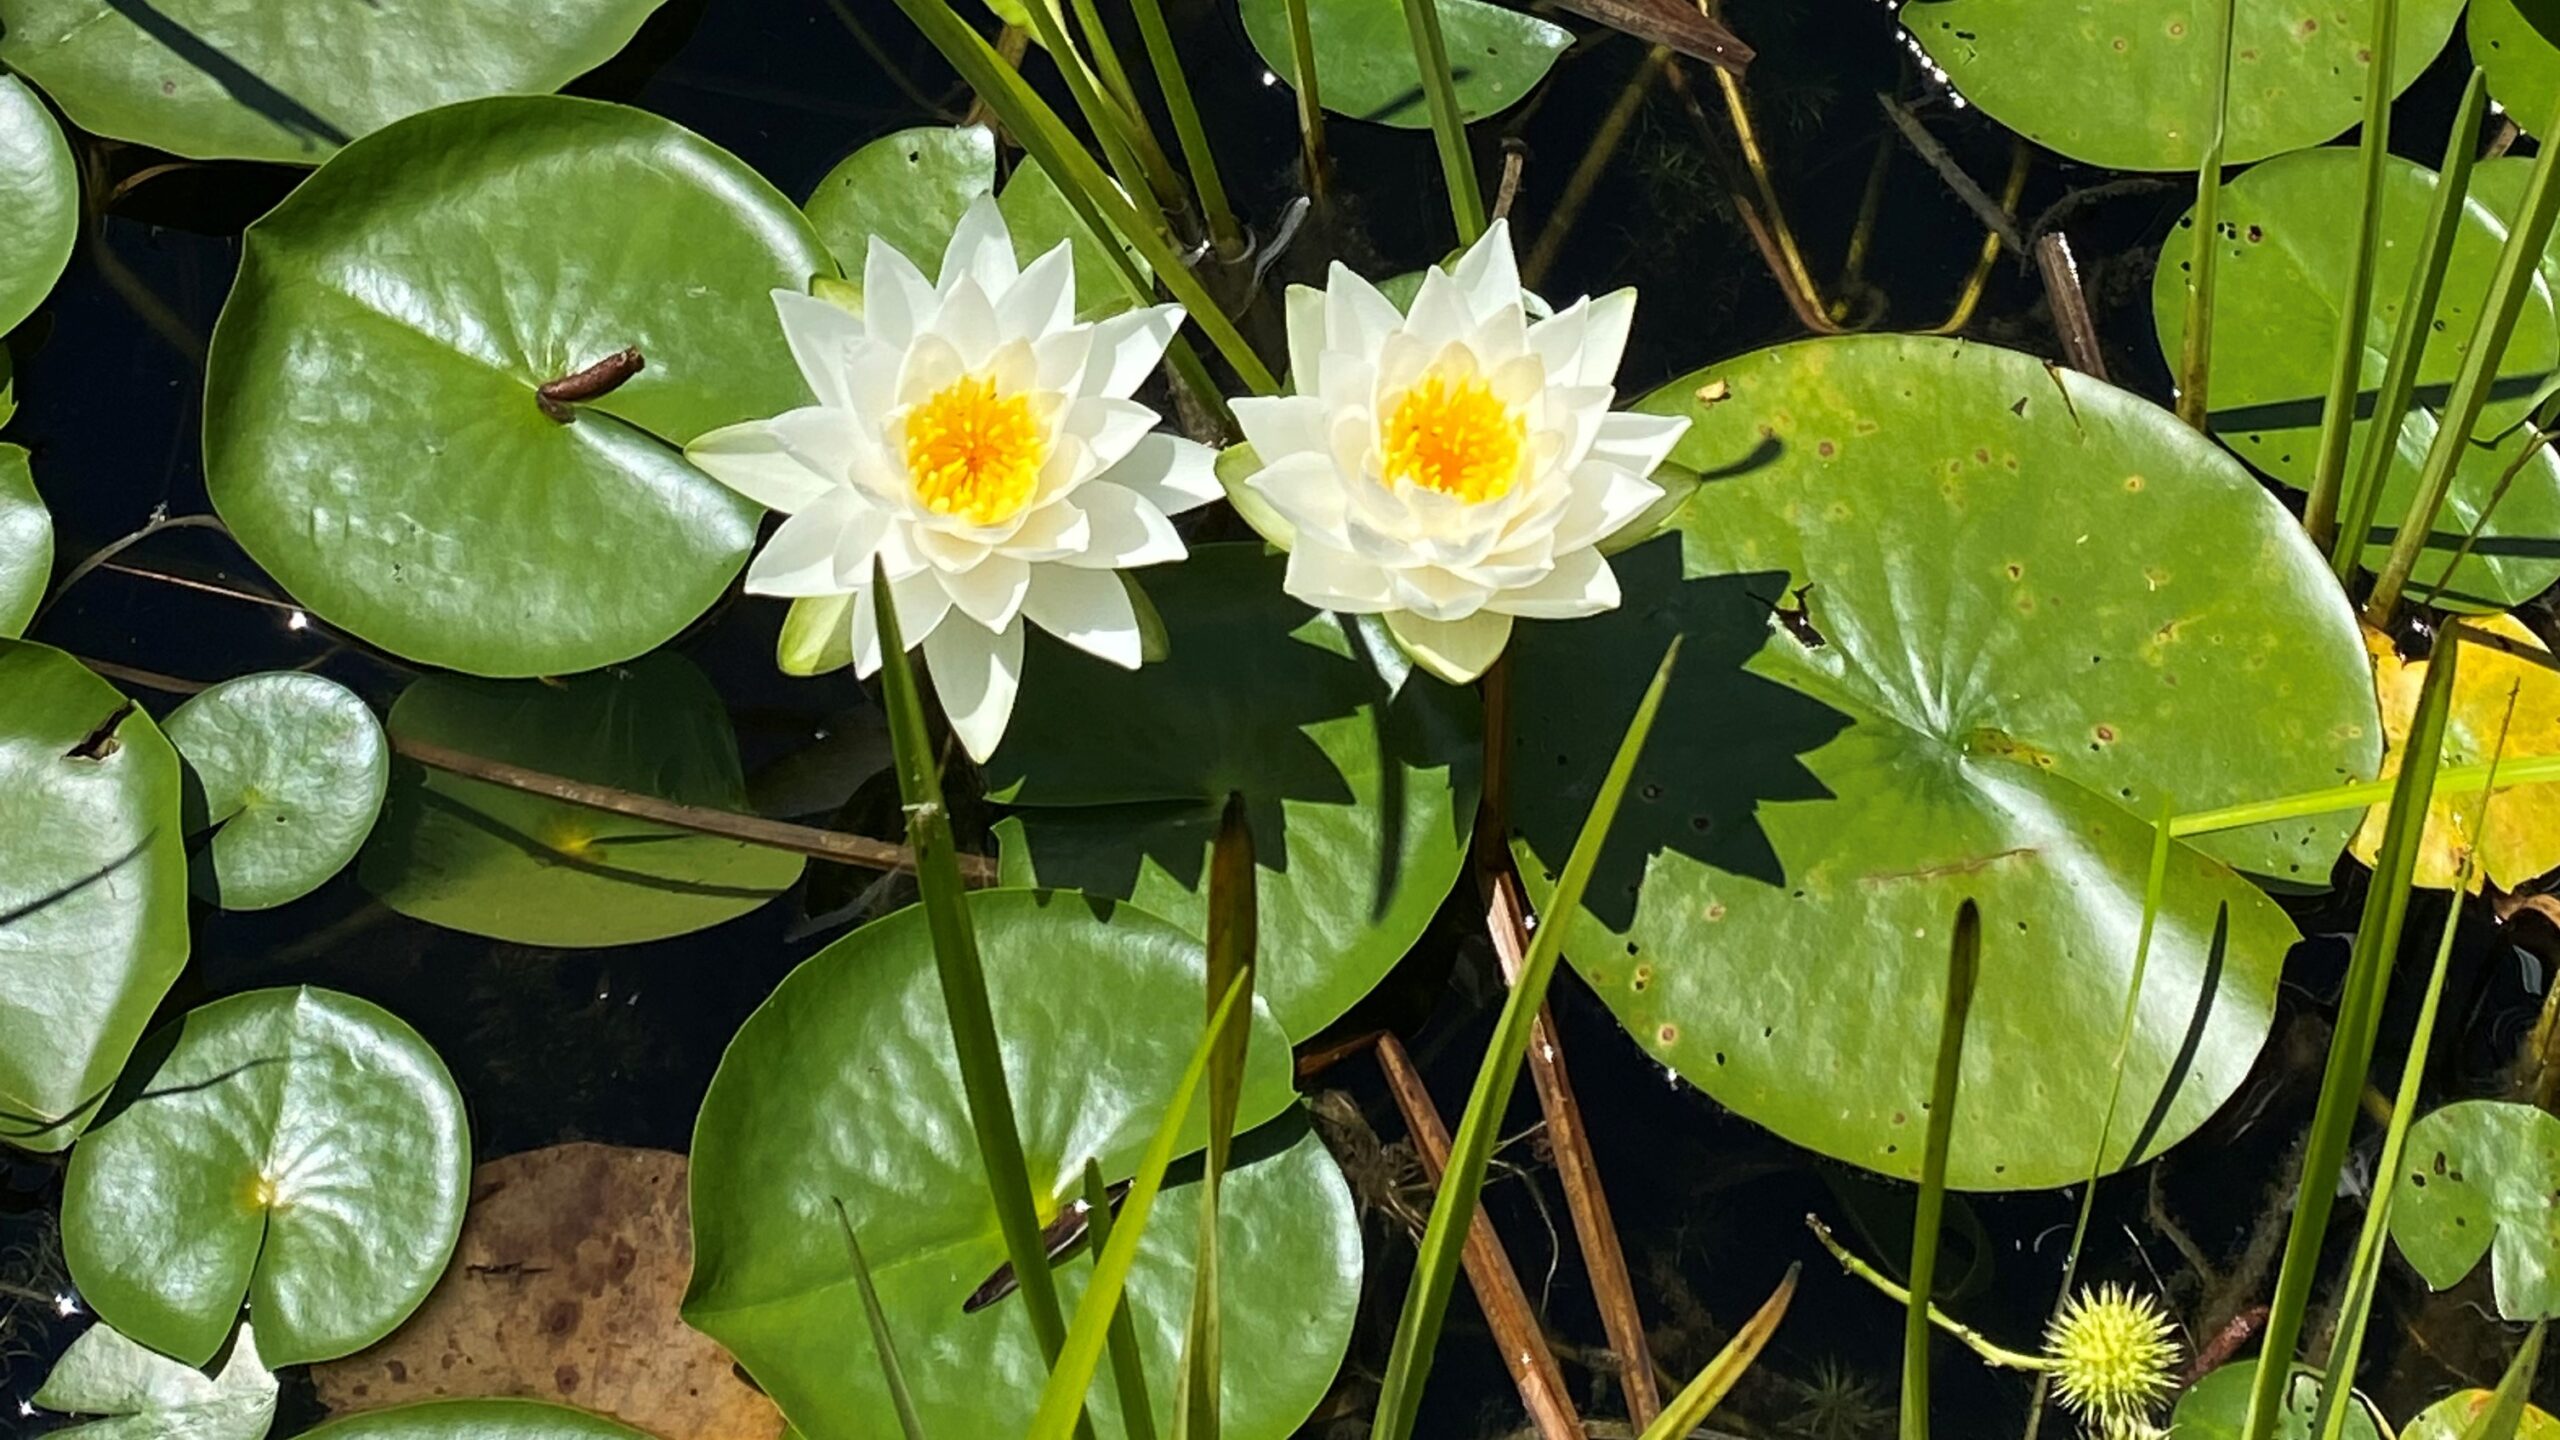 More Than Just a Pretty Flower: The Fragrant Water Lily